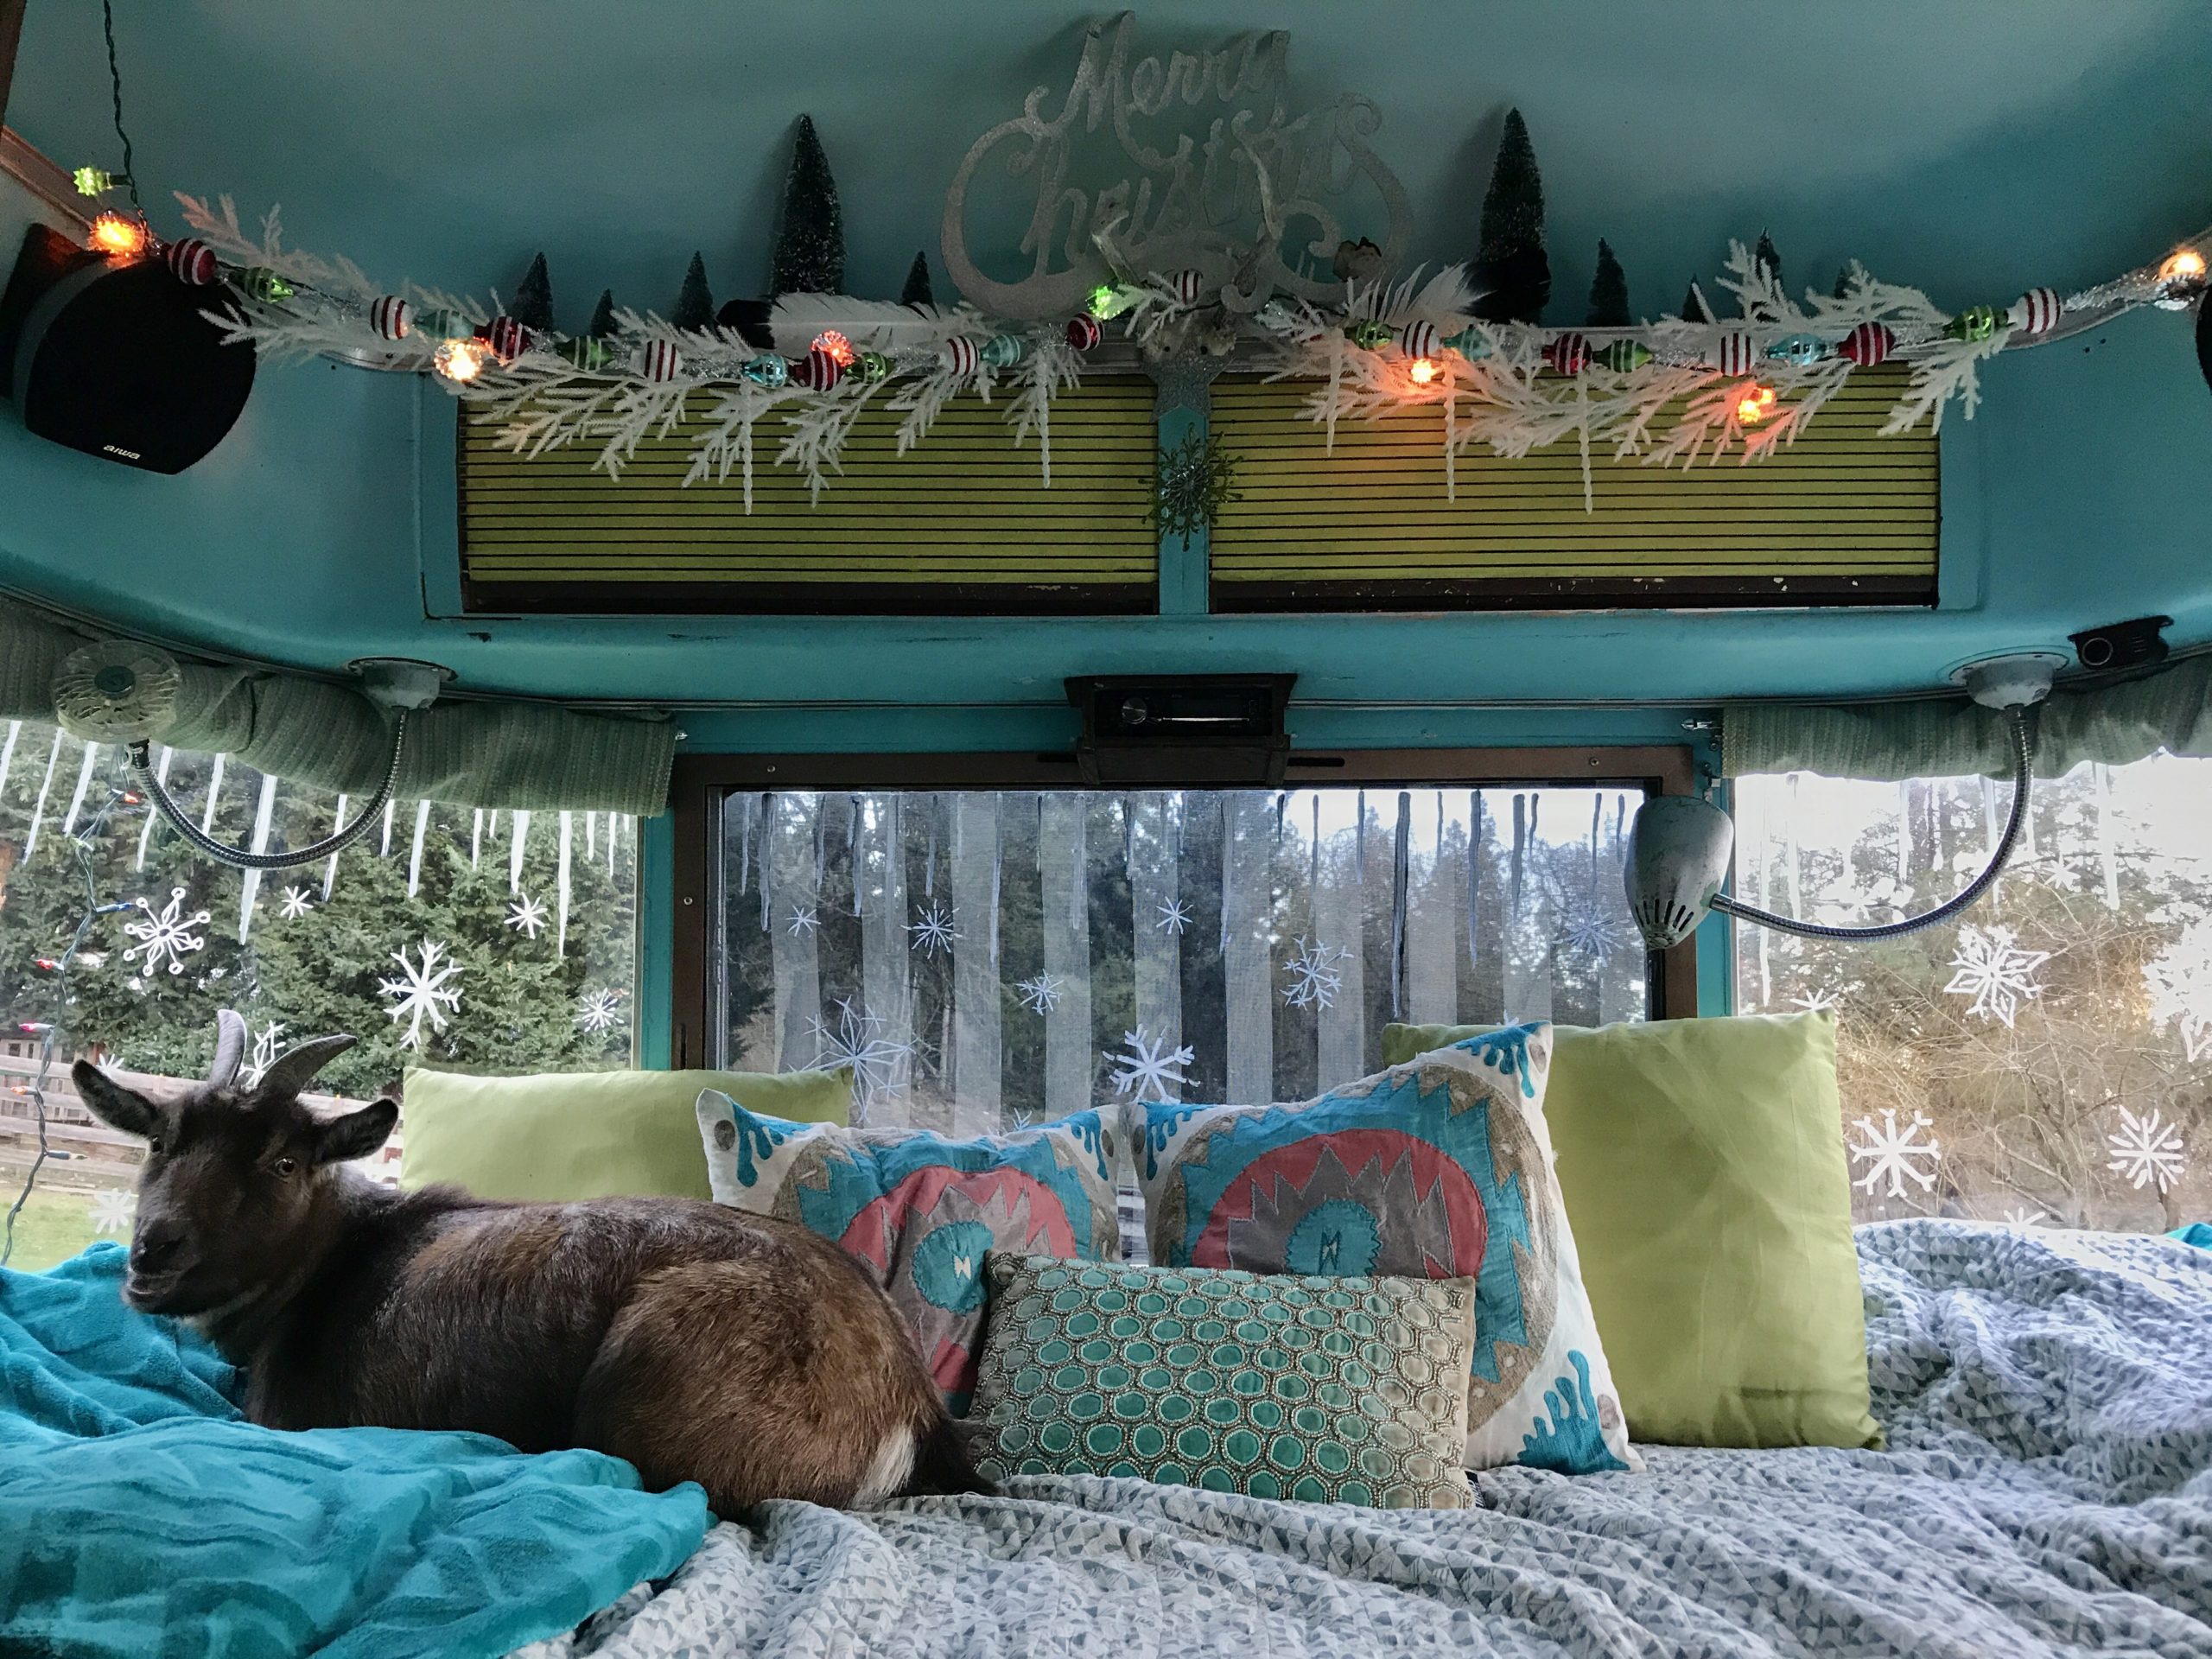 Pet goat relaxing on travel trailer bed with holiday decorations